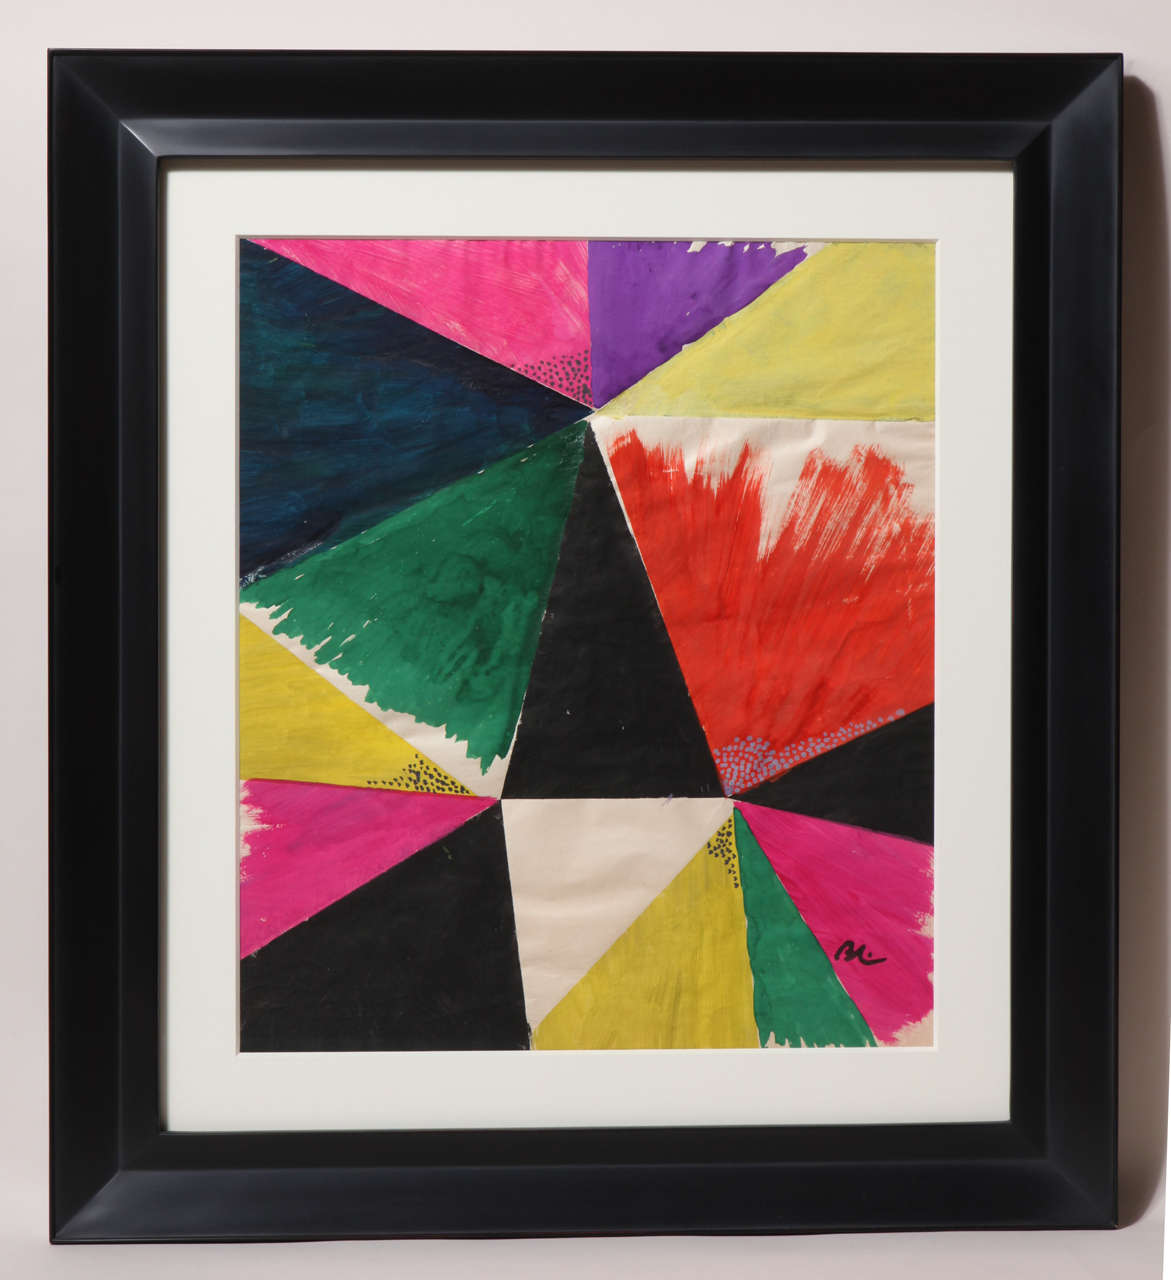 Measures: Image: 18 ½” wide, 21 ½” high
Frame: 26 ¾” wide; 29 ¾” high

Custom framed with mat and museum glass.

multicolored abstract composition of triangles.

Signed BL on lower right.